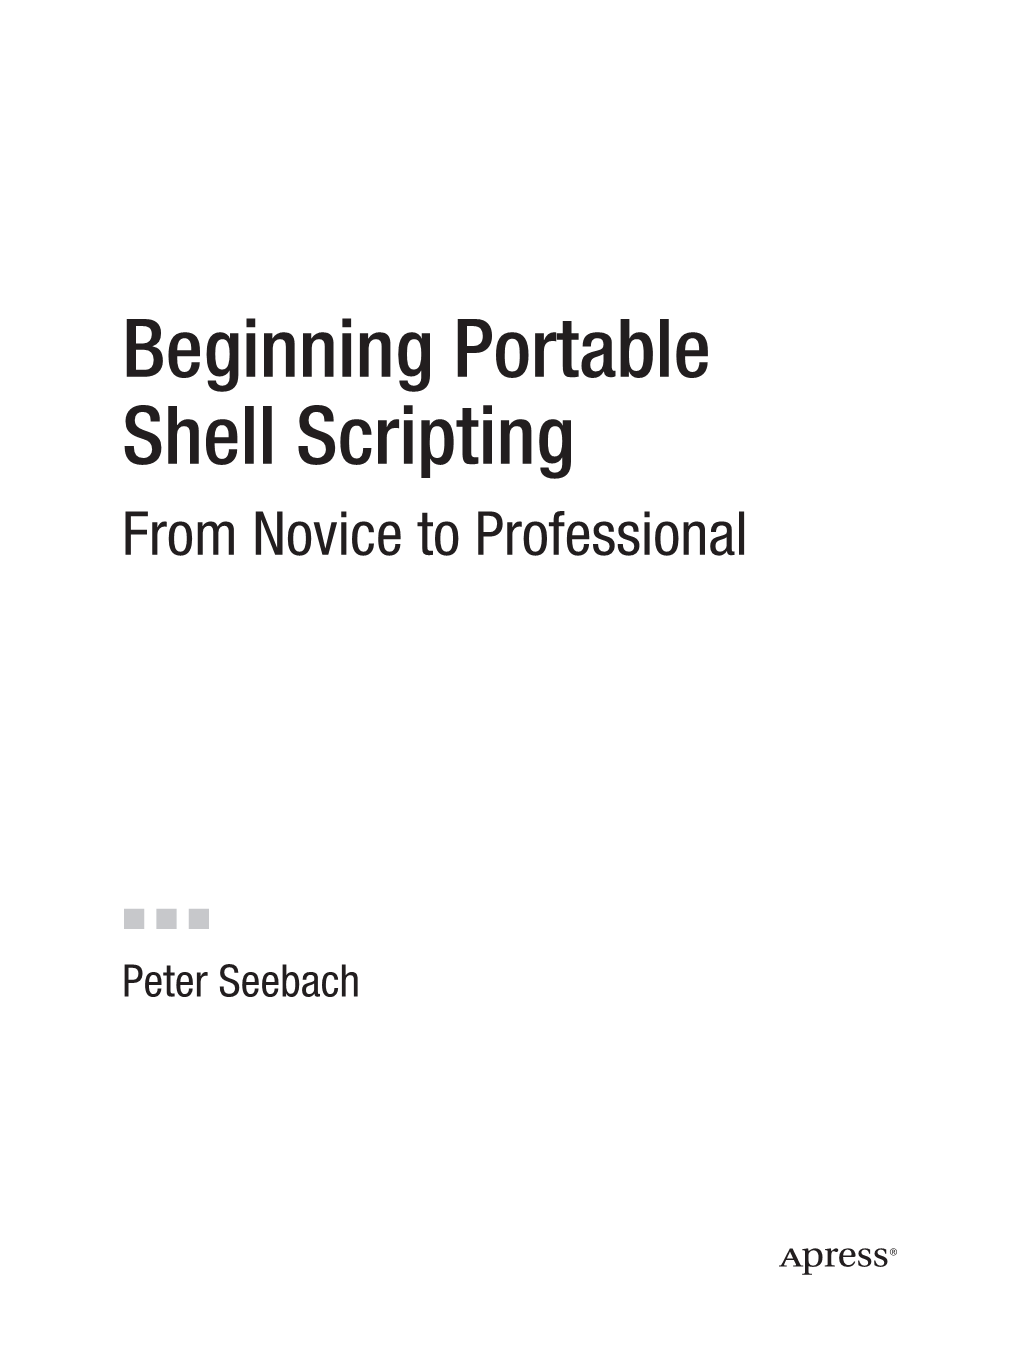 Beginning Portable Shell Scripting from Novice to Professional